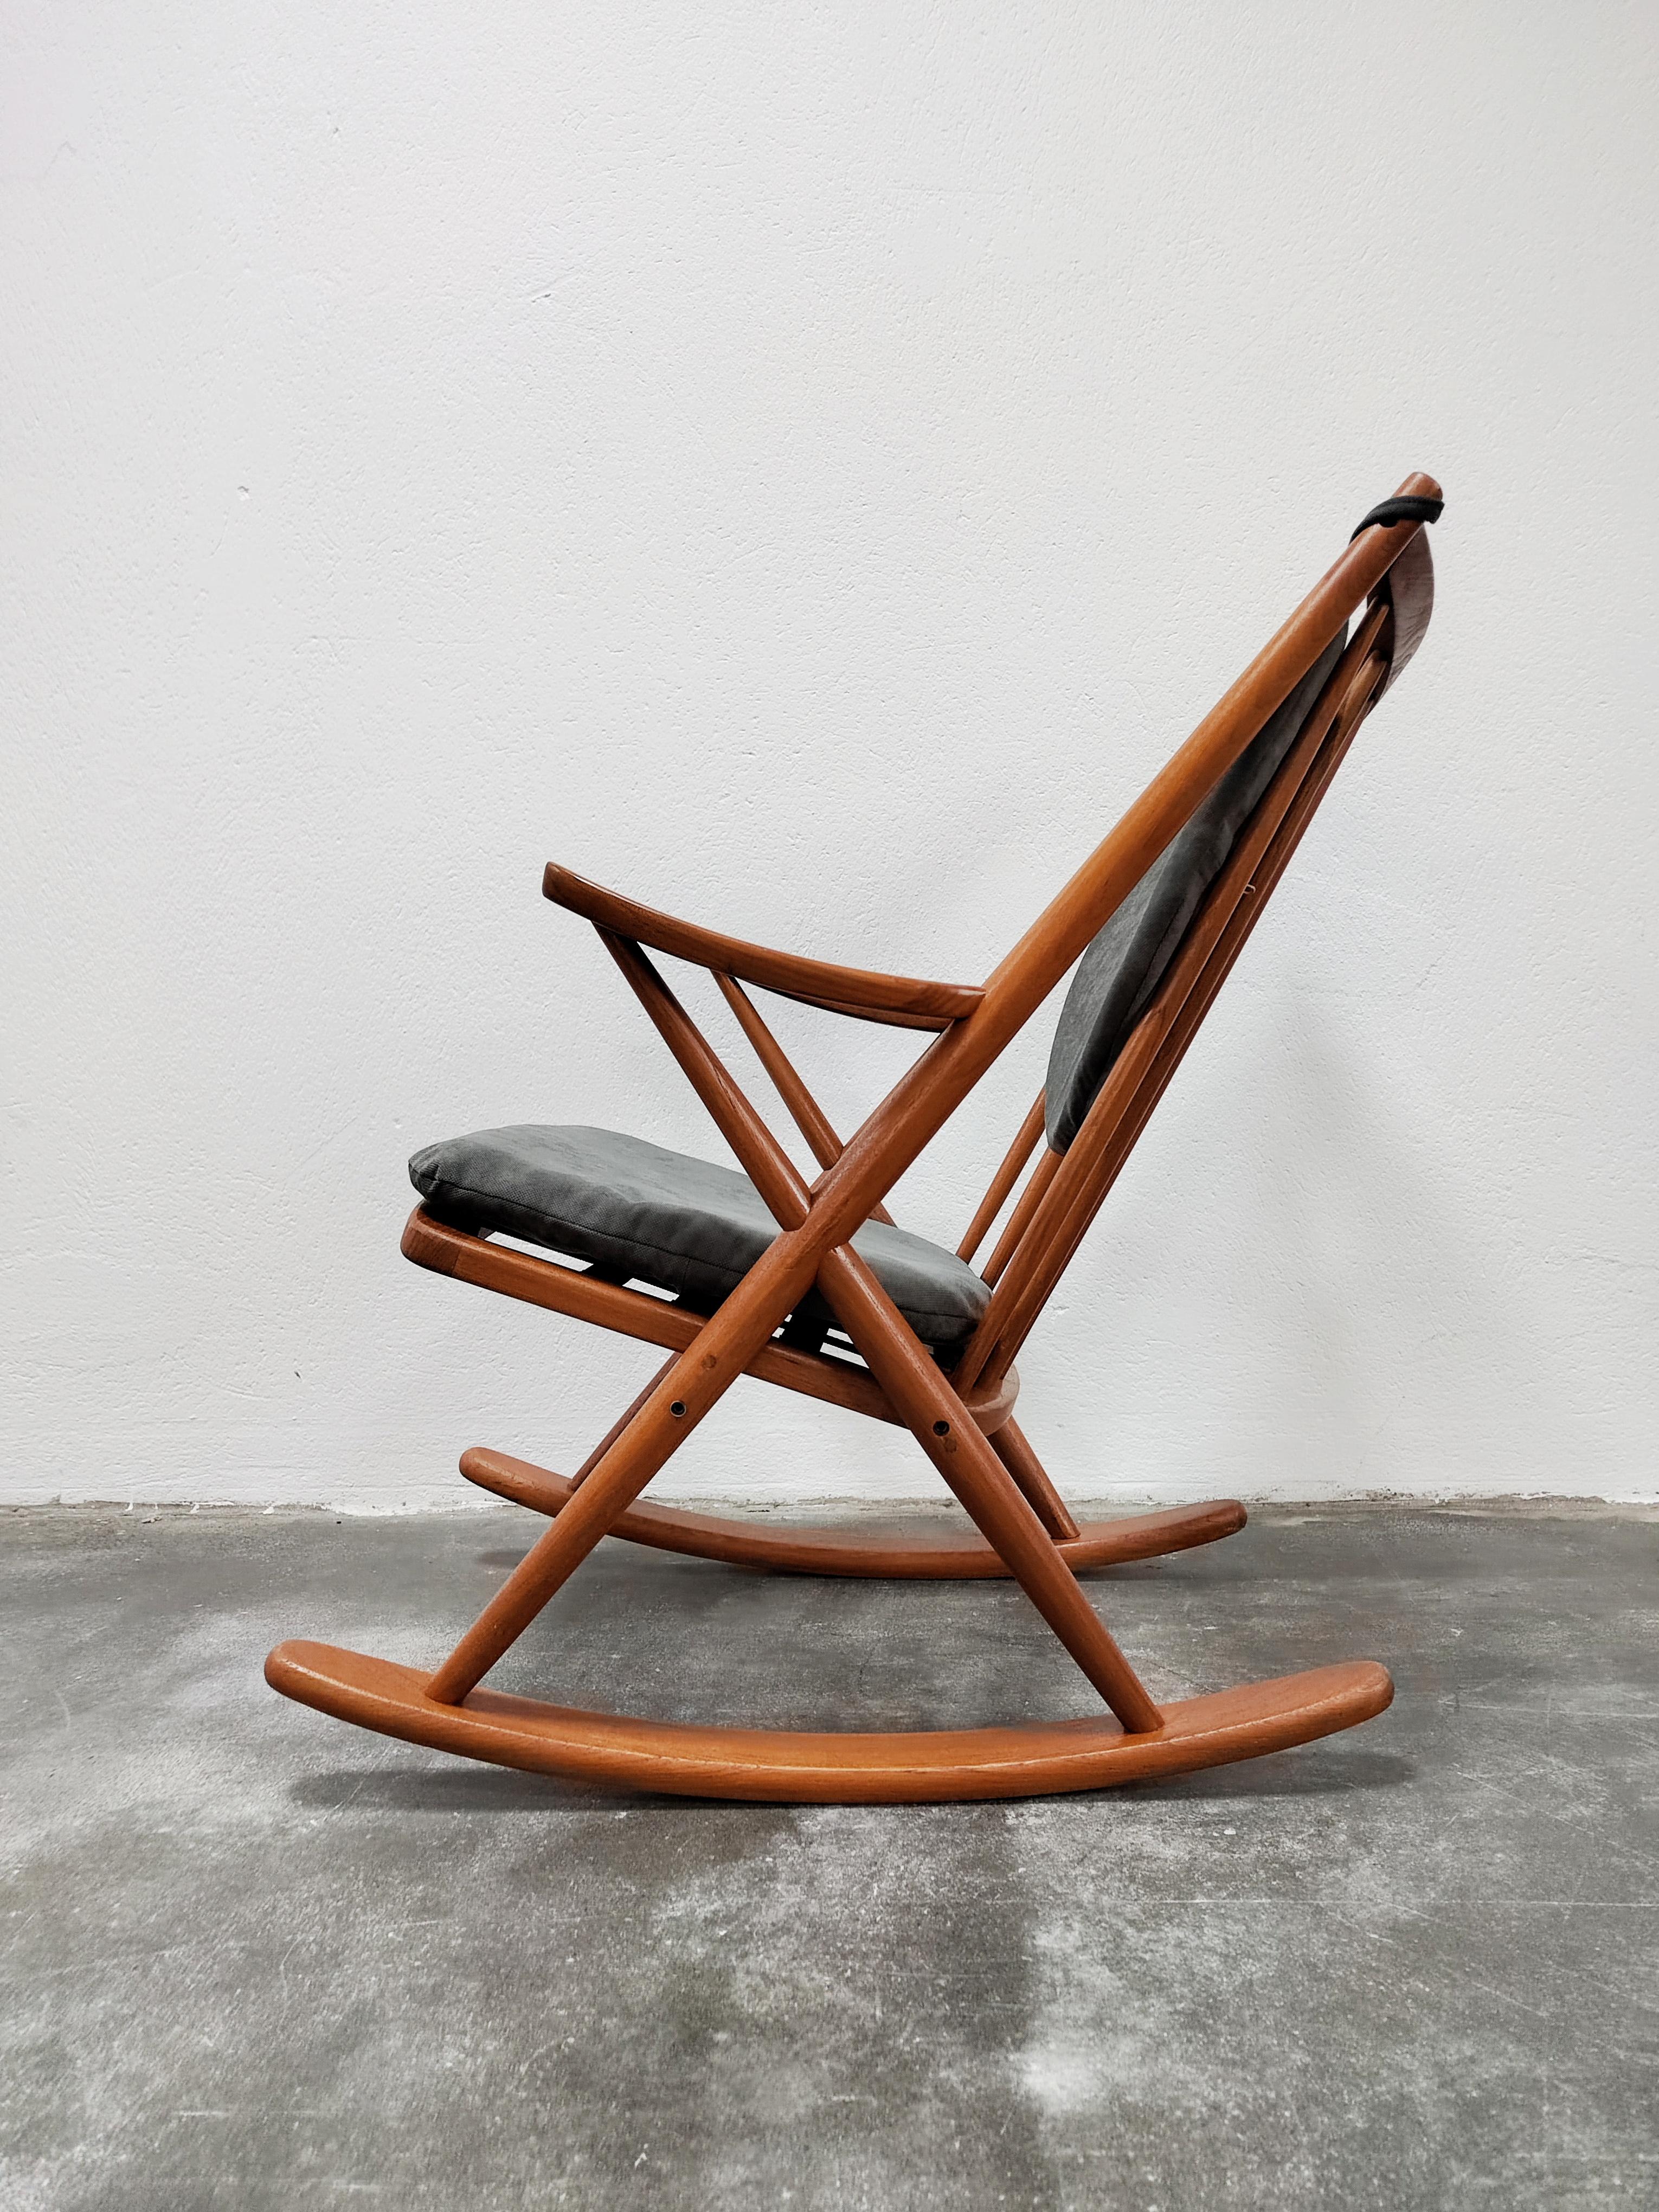 In this listing you will find a gorgeous Mid-Century Modern rocking chair designed by Frank Reenskaug for Bramin Mobler. The rocking chair is done in solid teak wood. It has recently been cleaned up by sending and it got teak oil finish. Also, the